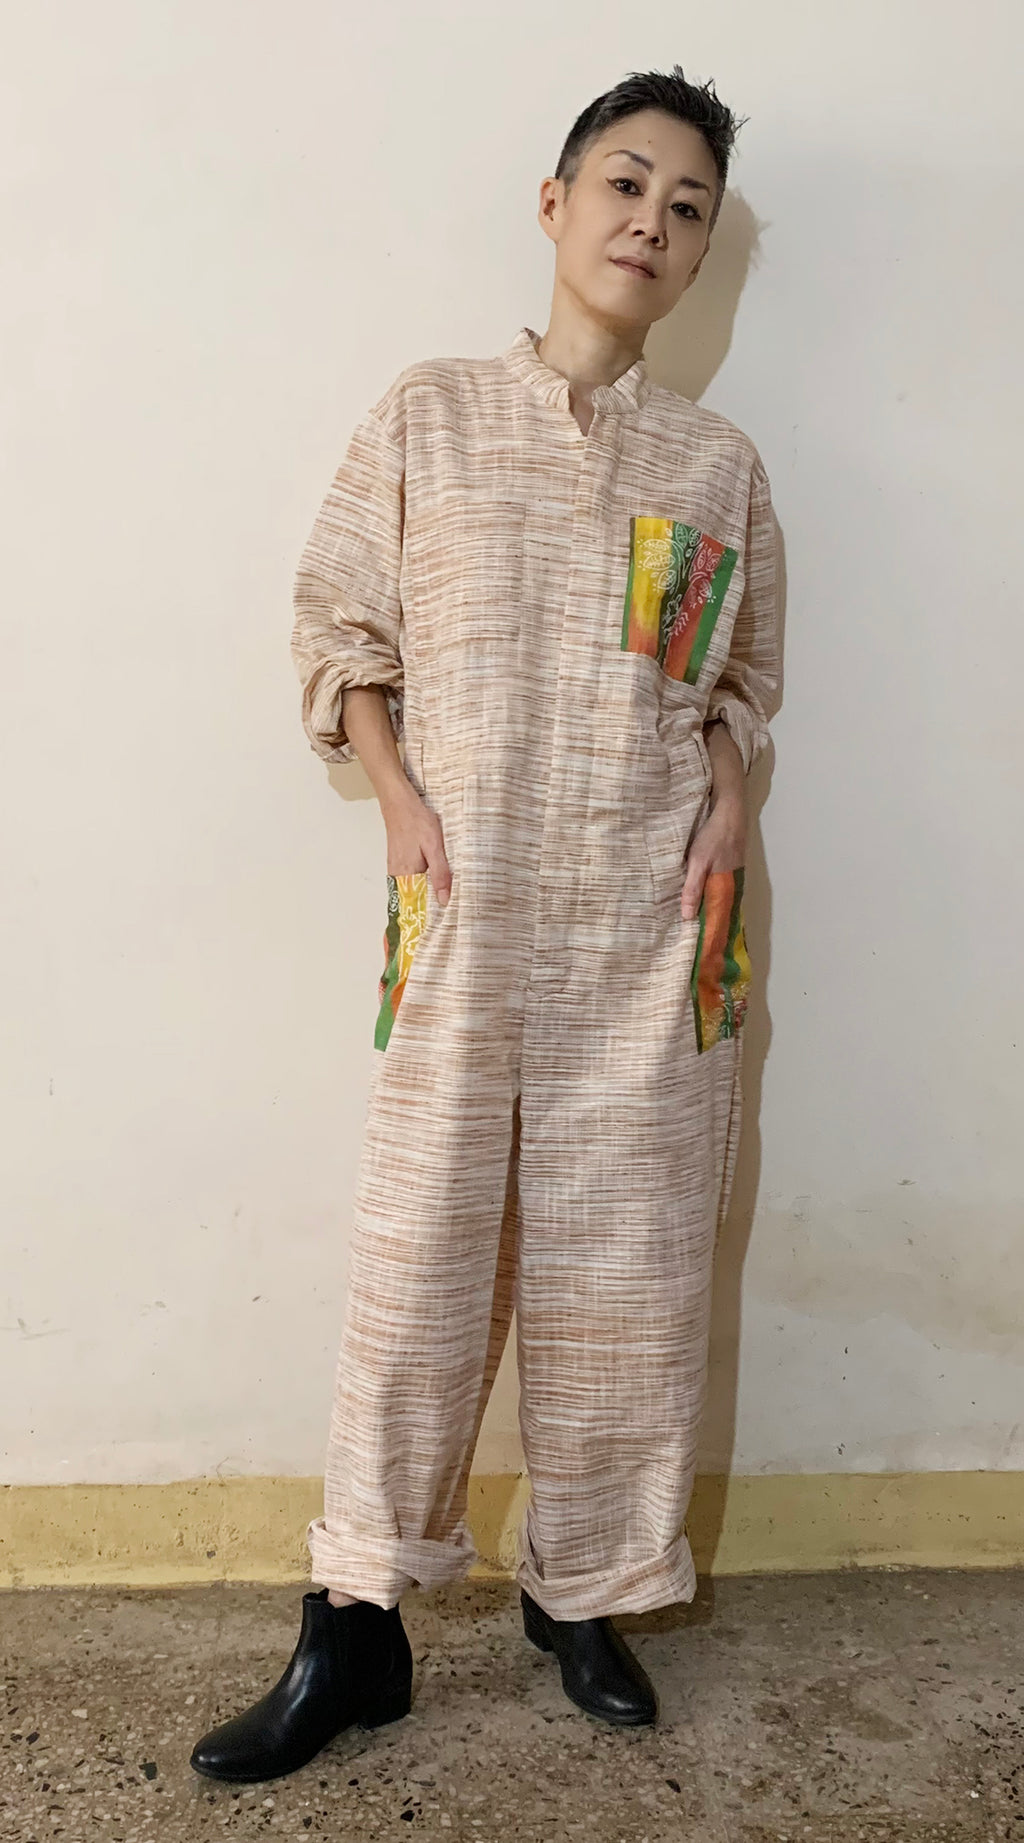 Indian classic boiler suit (coverall) with ivory Khadi cotton for daily wear. The oversized silhouette with slightly-shaped waistline (hence 2.0!) gives cool vibes. Comfy & sassy & cute. Shop online.